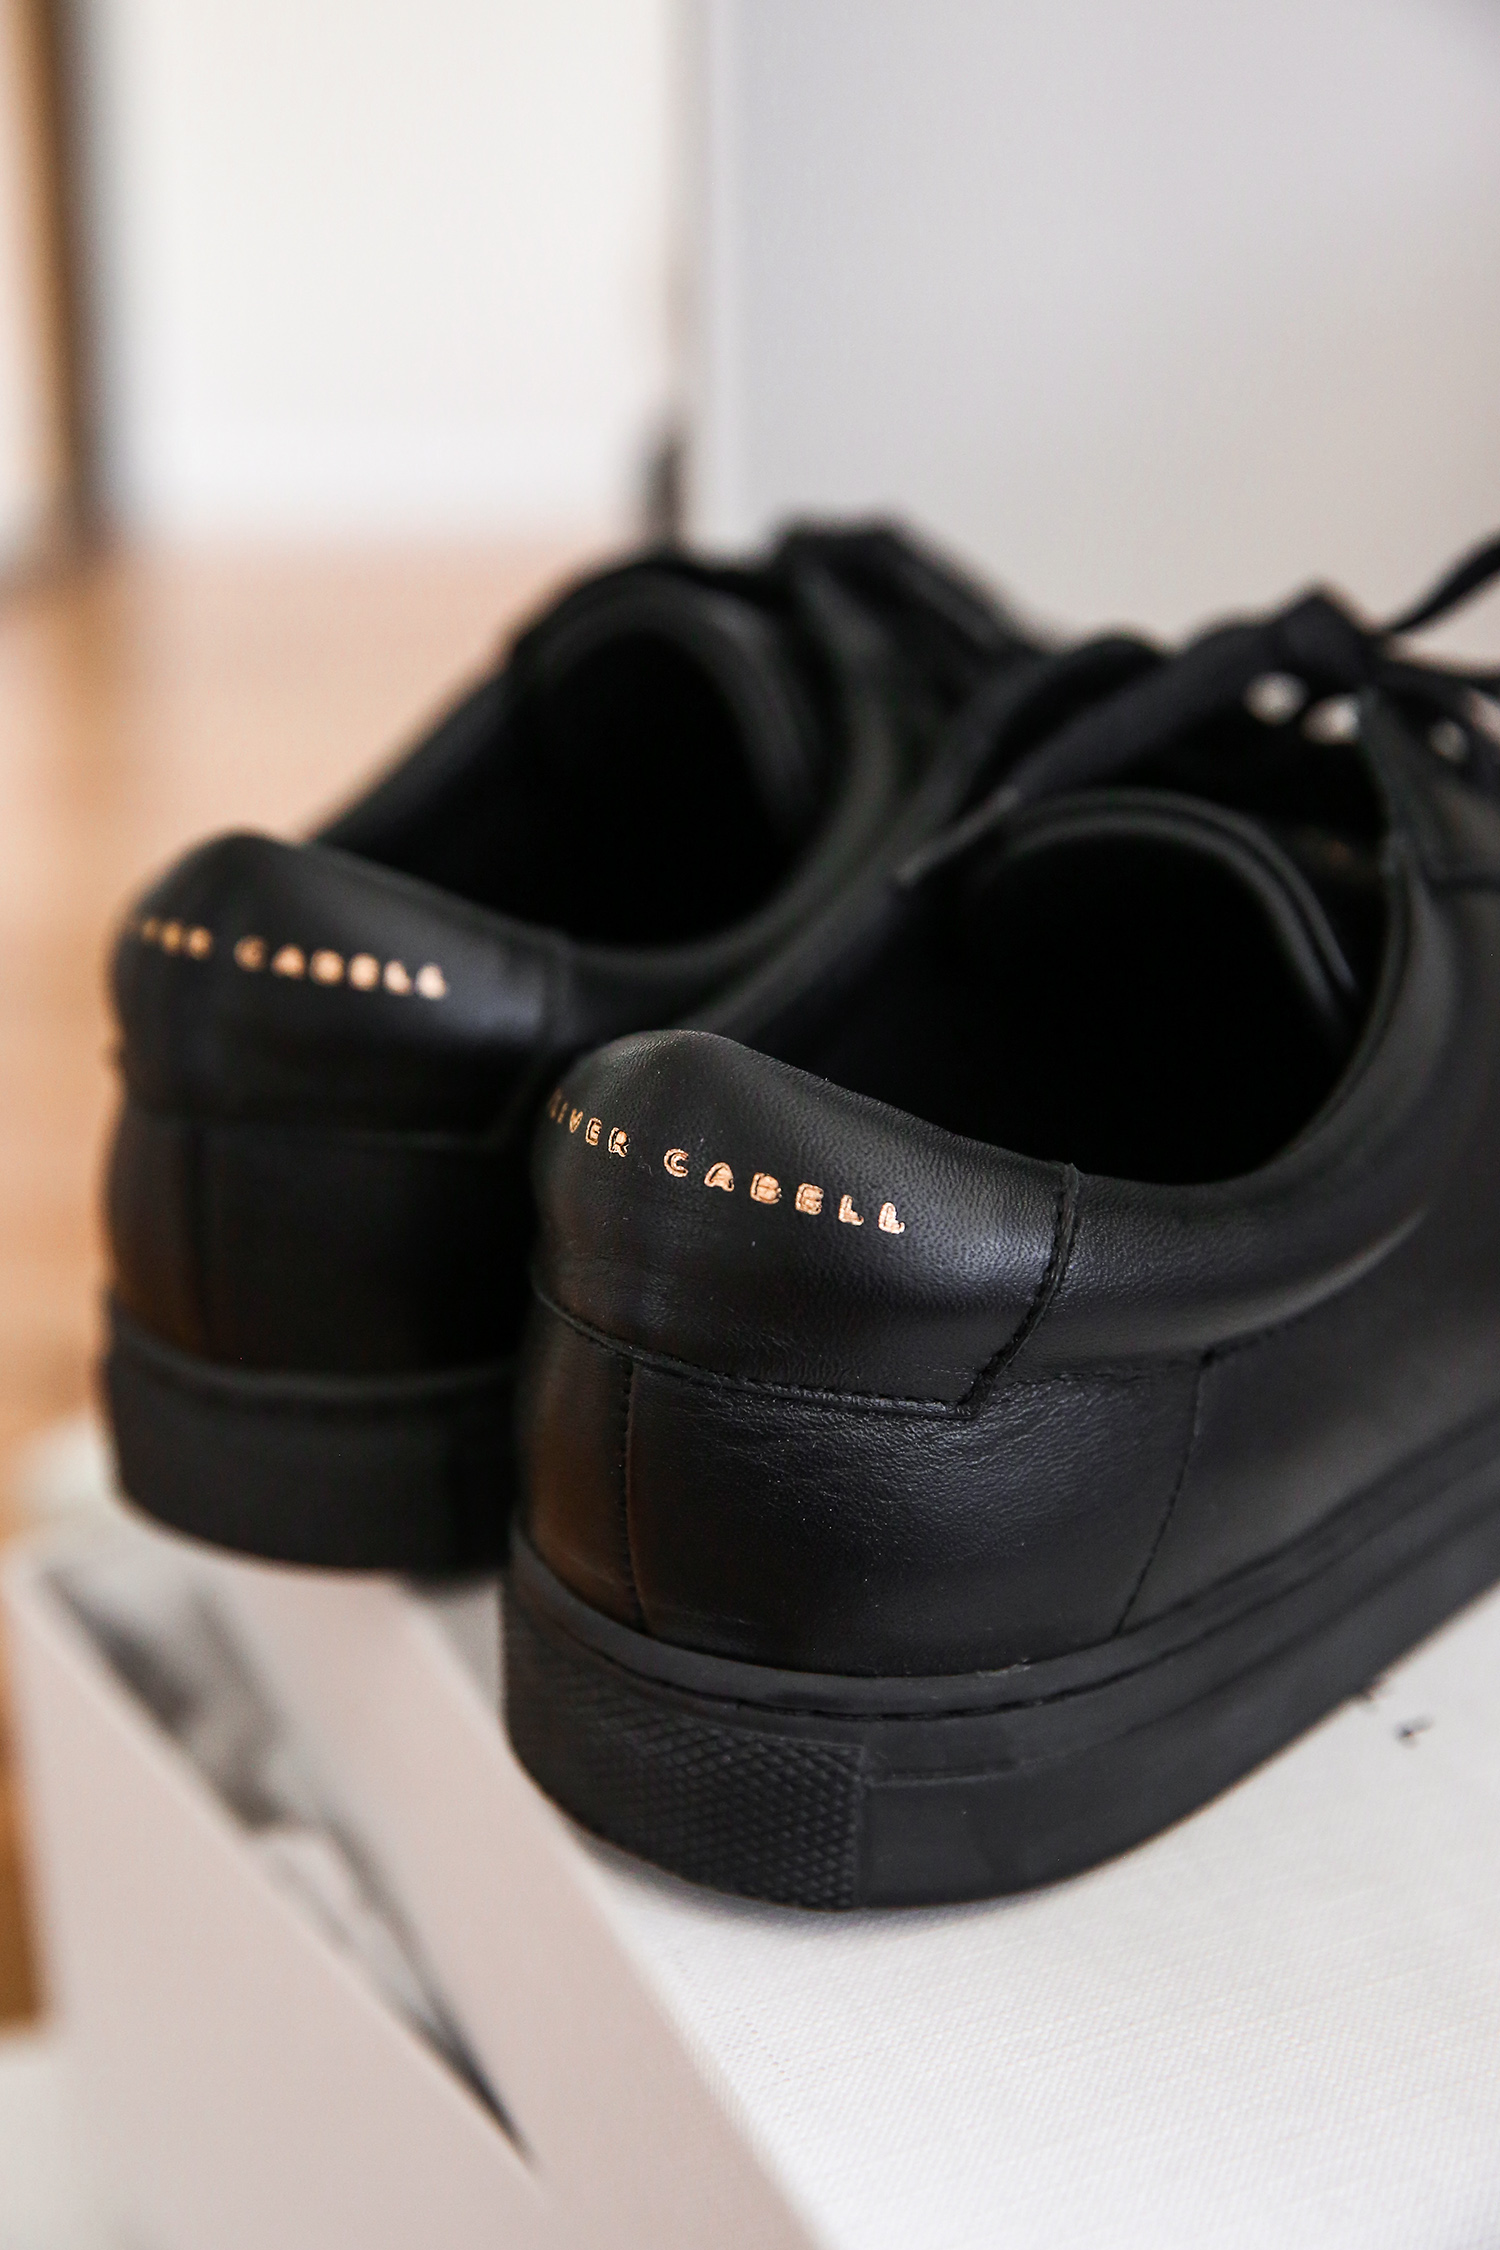 Oliver Cabell Low 1 Sneaker Review